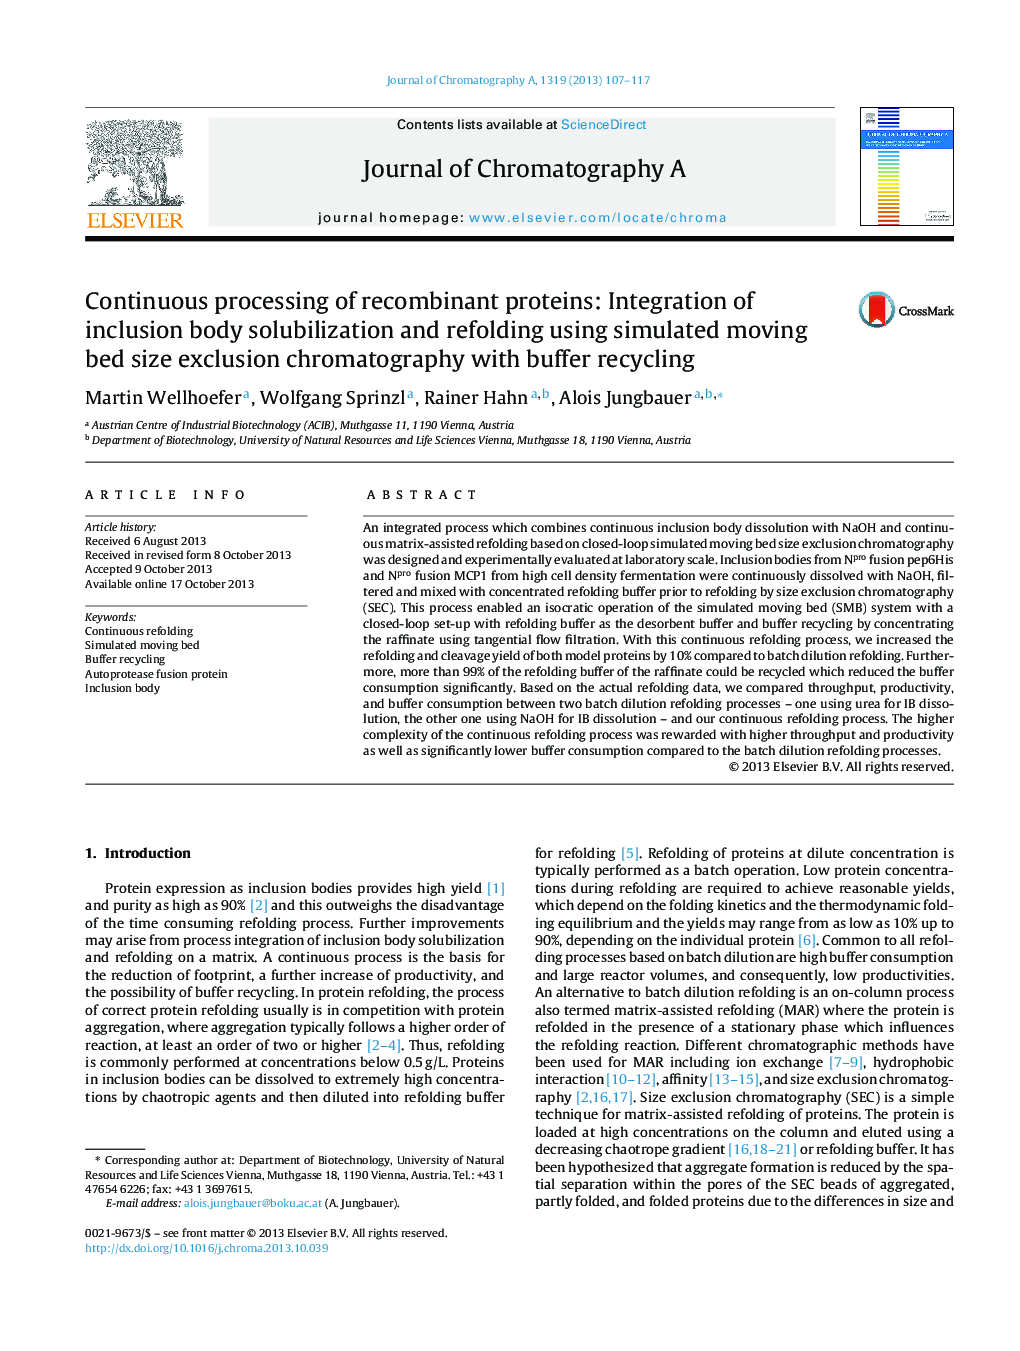 Continuous processing of recombinant proteins: Integration of inclusion body solubilization and refolding using simulated moving bed size exclusion chromatography with buffer recycling